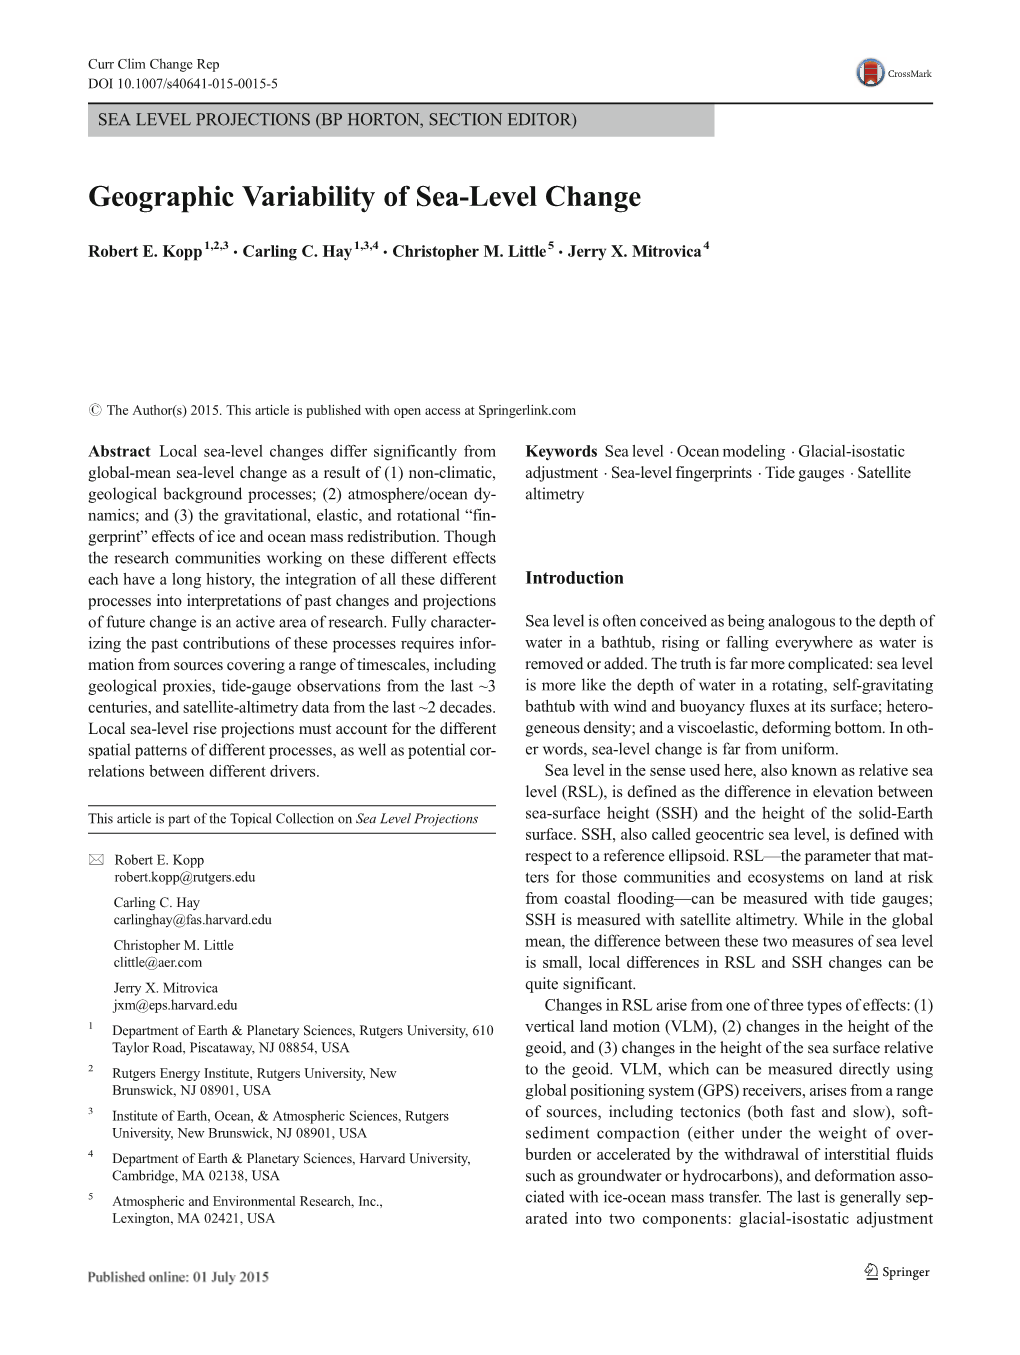 Geographic Variability of Sea-Level Change